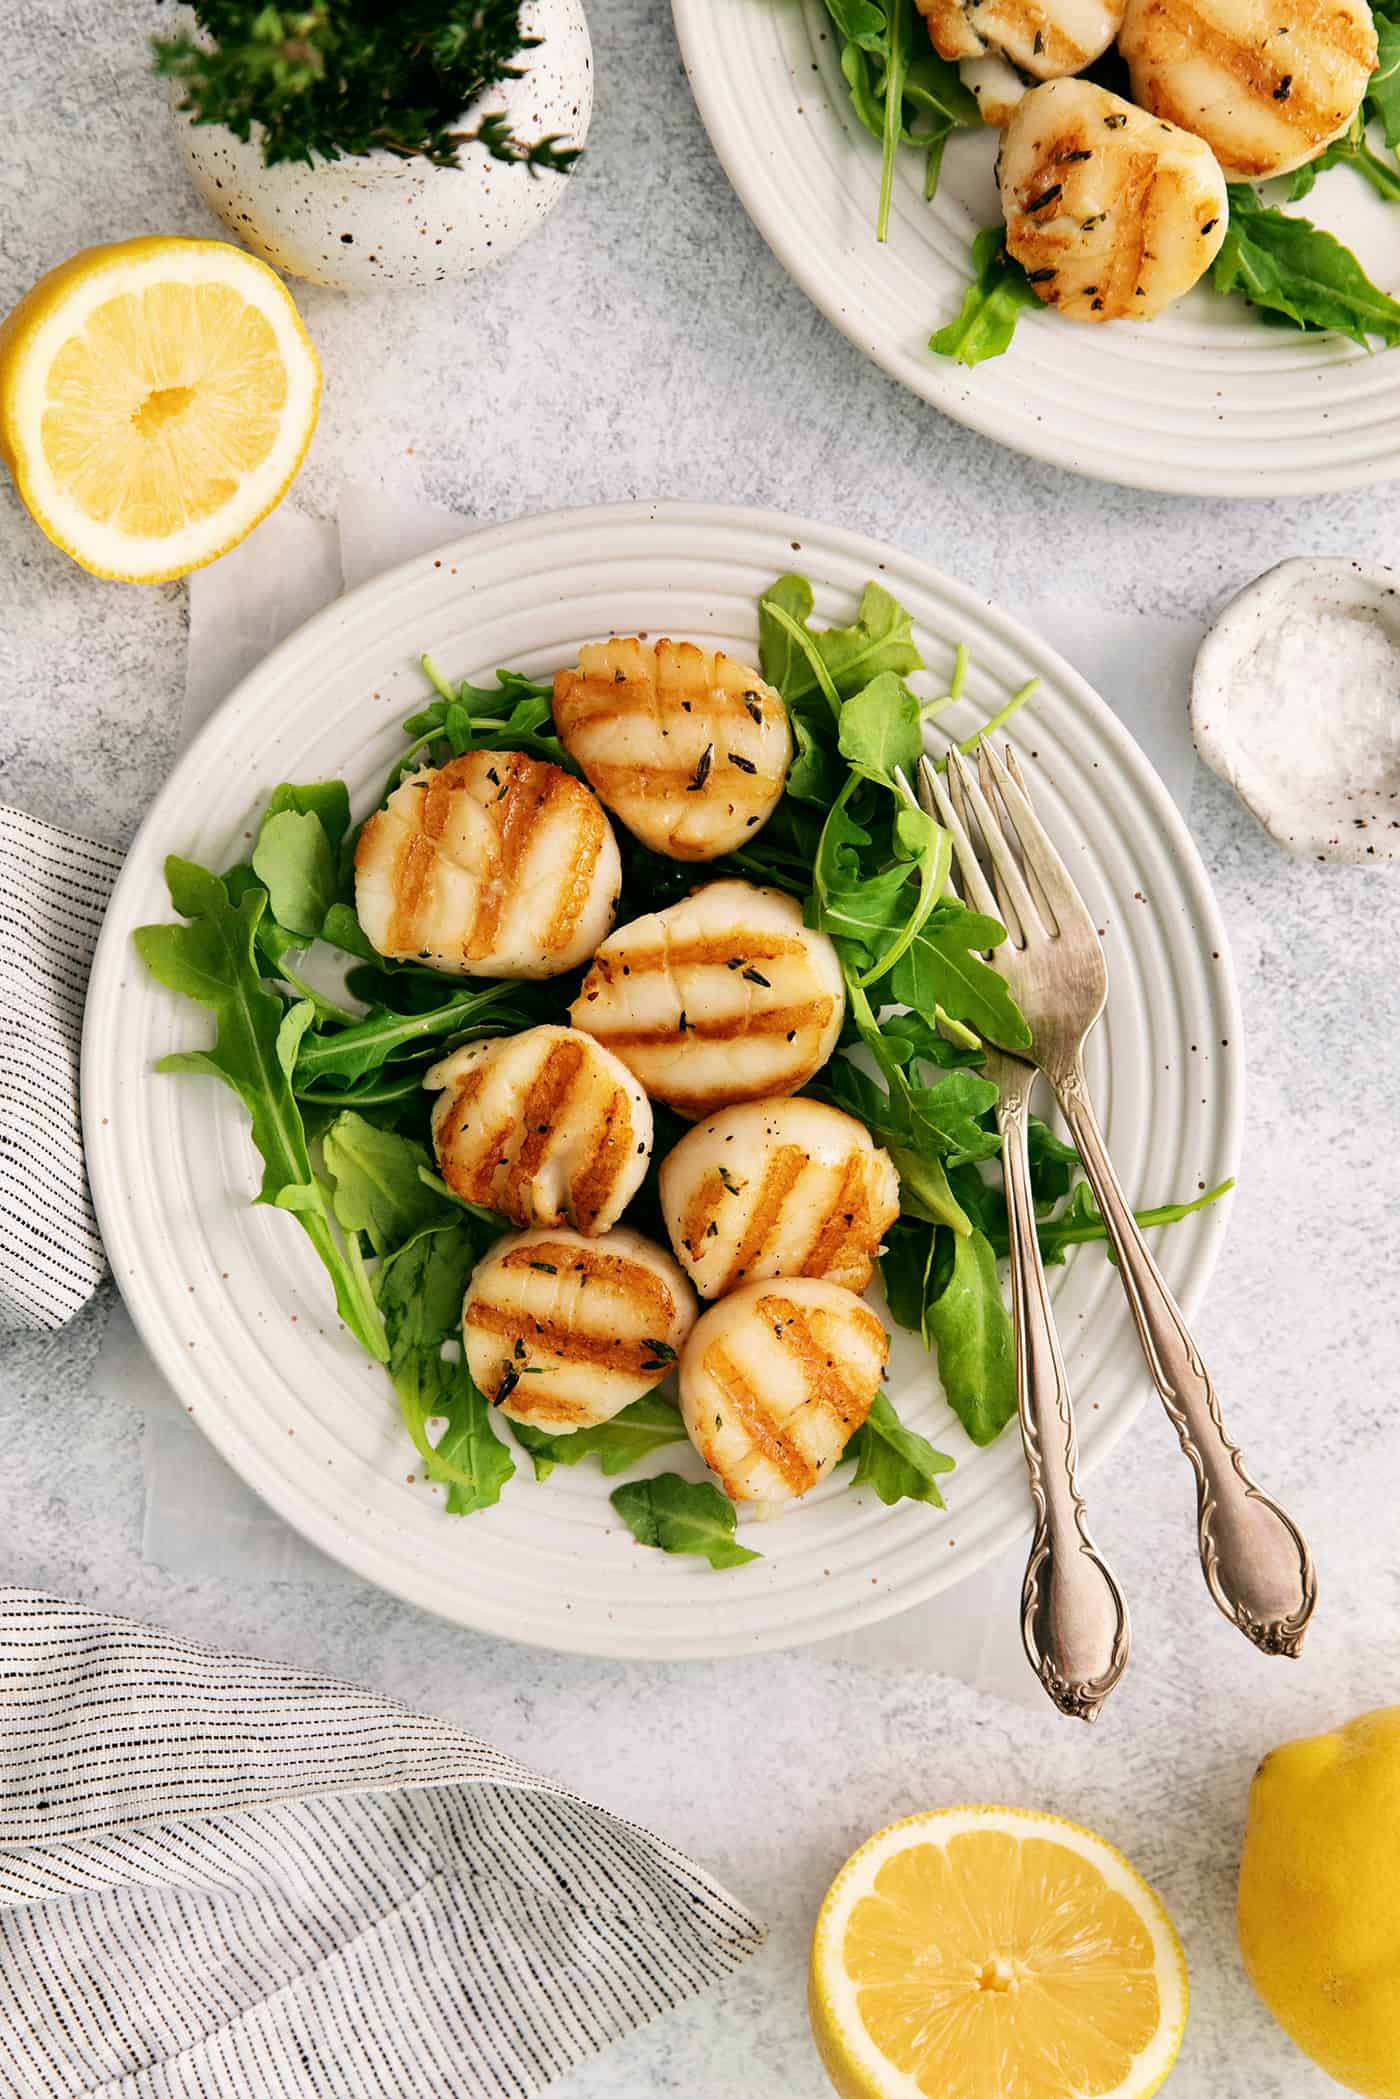 Grilled scallops on a bed of greens